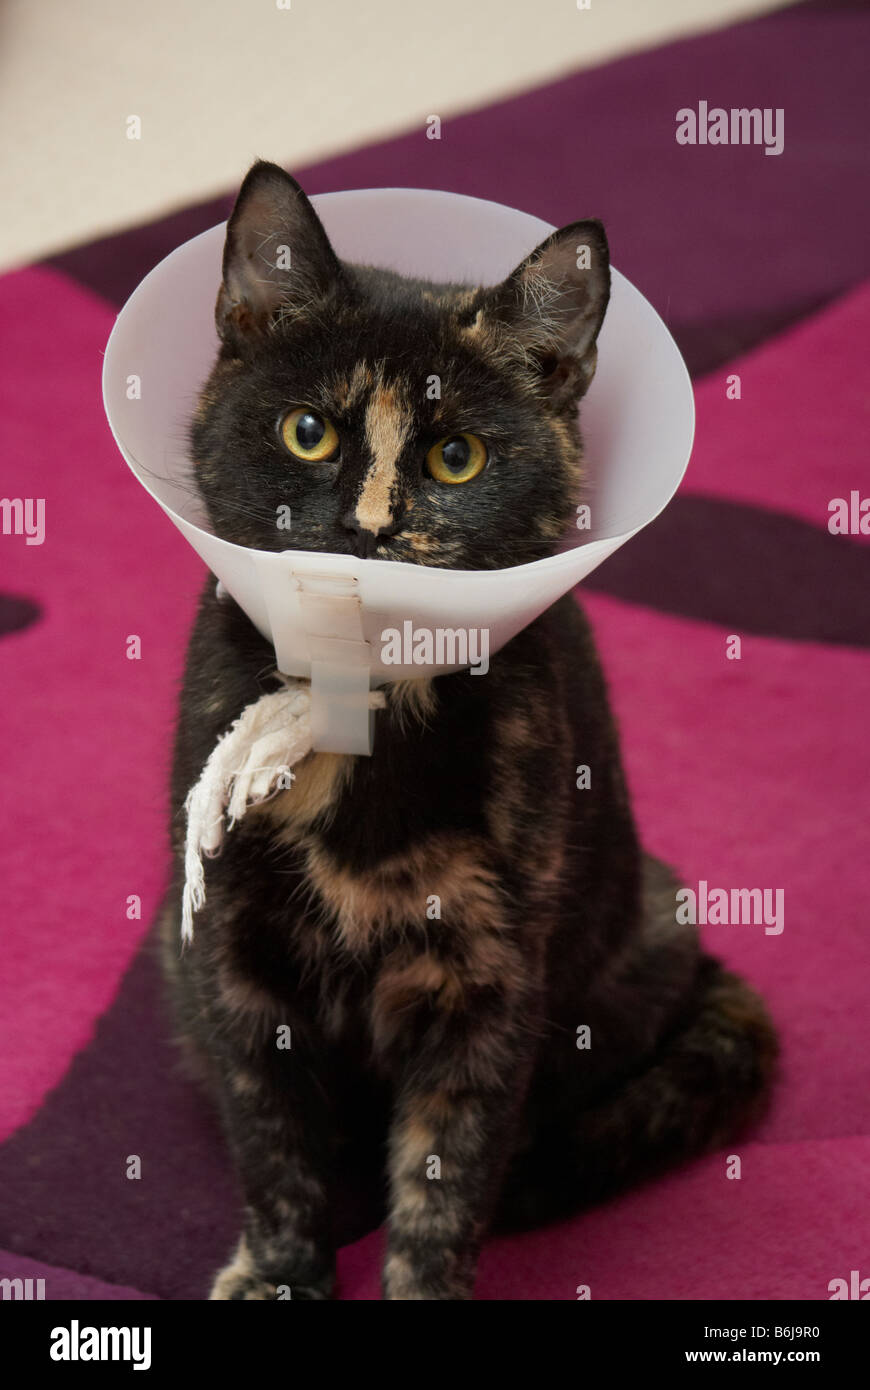 Kitten wearing a protective collar following medical operation Stock Photo